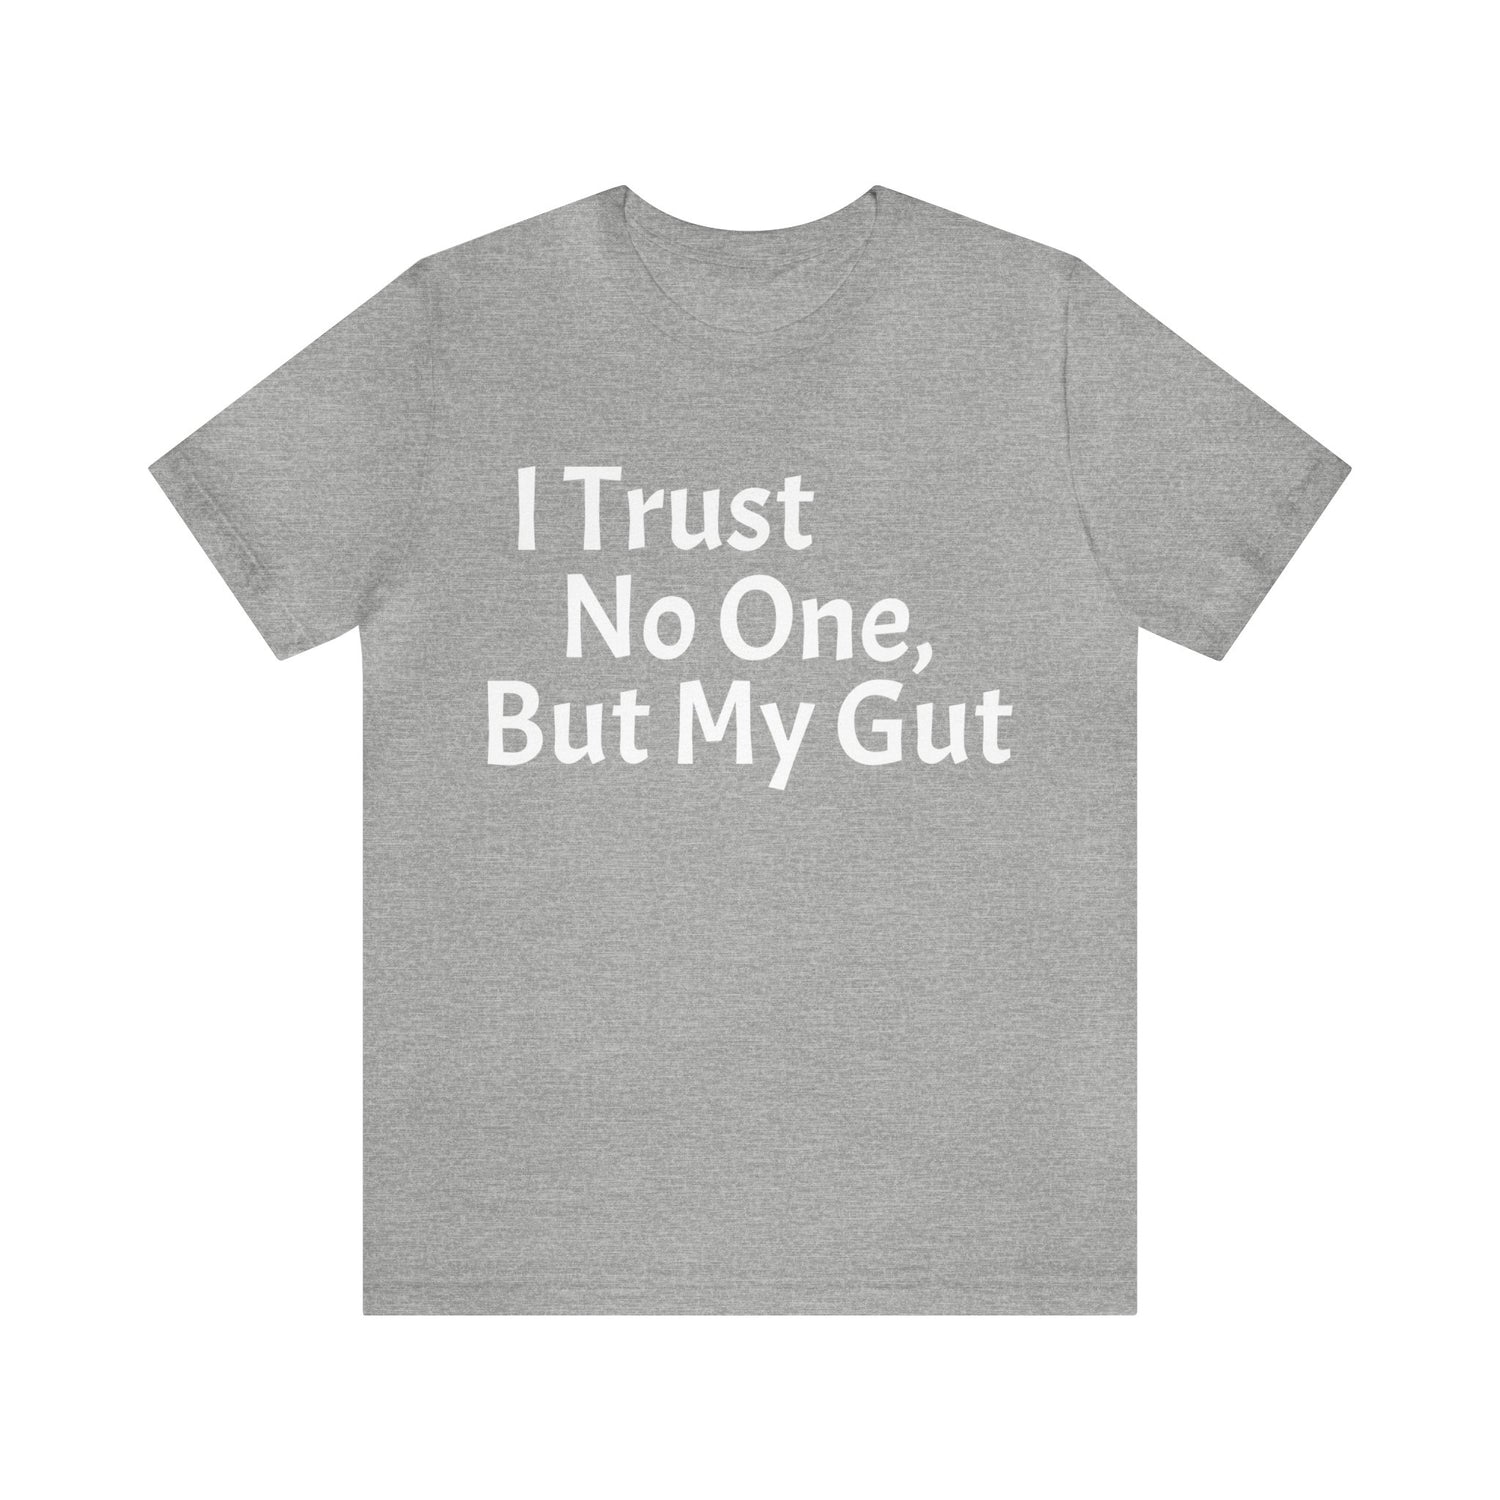 Funny T-Shirt About Trust | Trust Tee Athletic Heather T-Shirt Petrova Designs